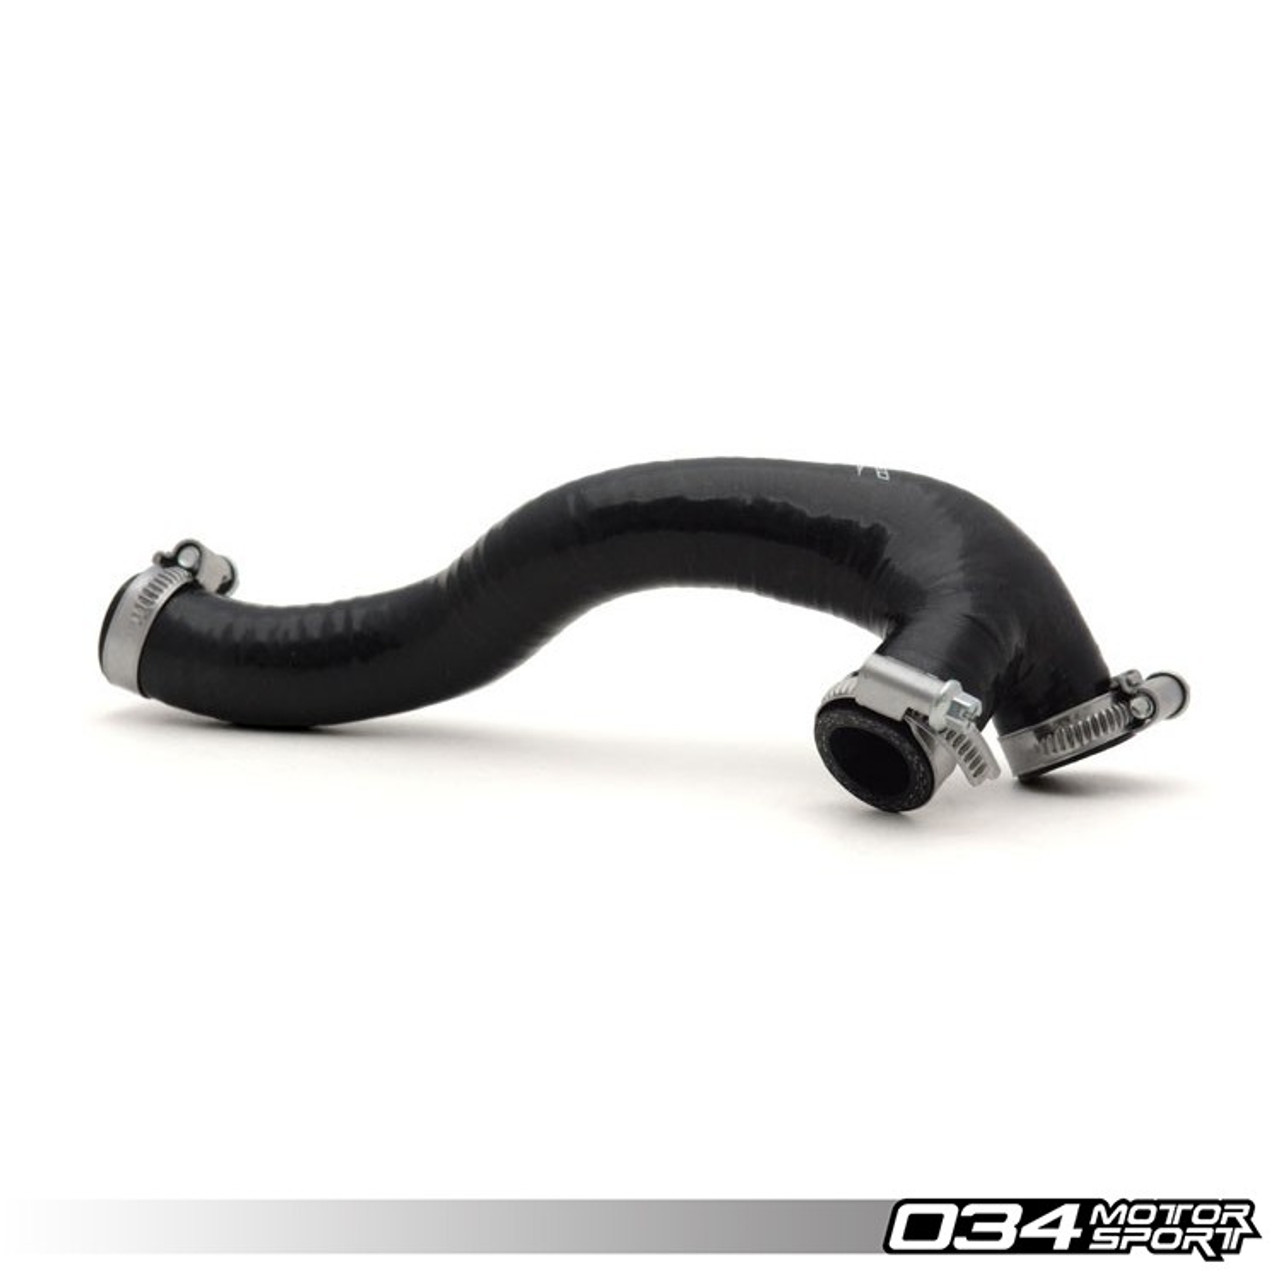 034Motorsport Silicone Valve Cover Breather Hose for Early AWP 1.8T